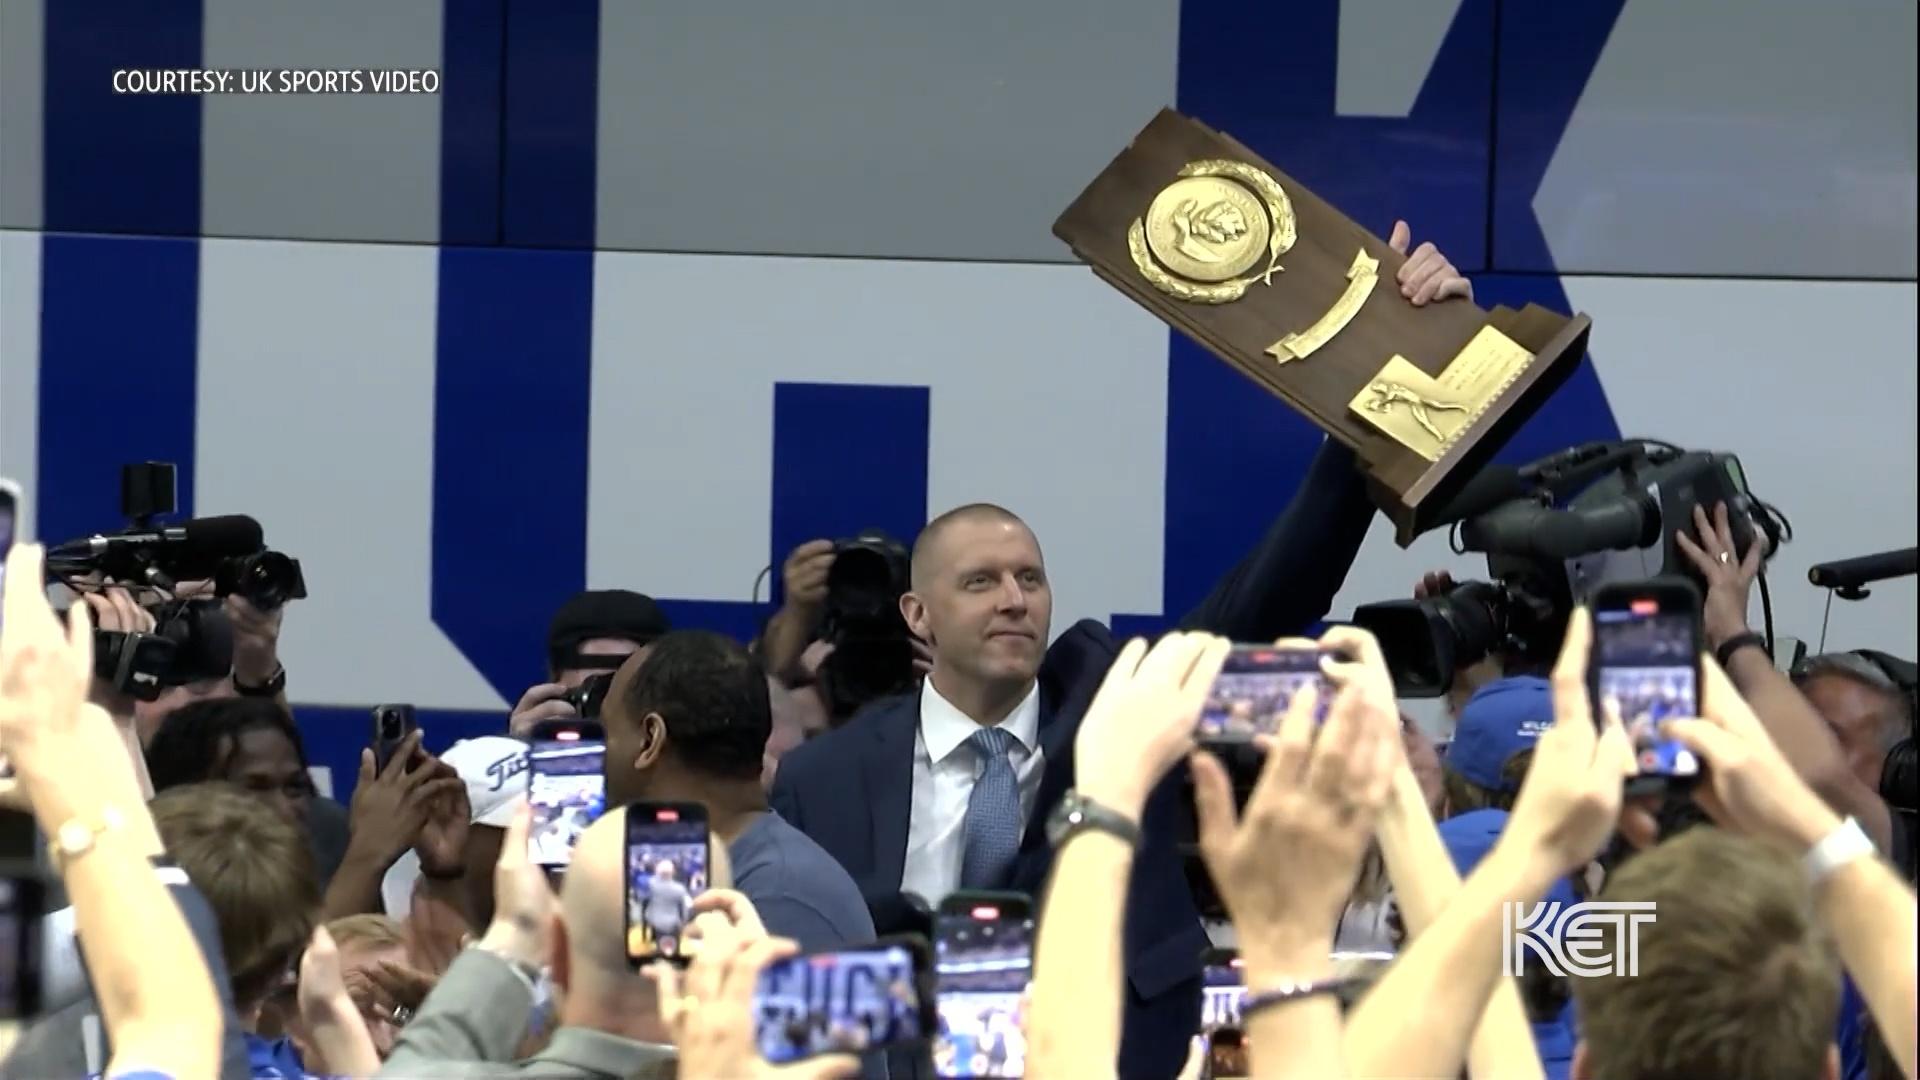 Fans Pack Rupp Arena to Welcome New UK Men’s Basketball Coach, Mark Pope